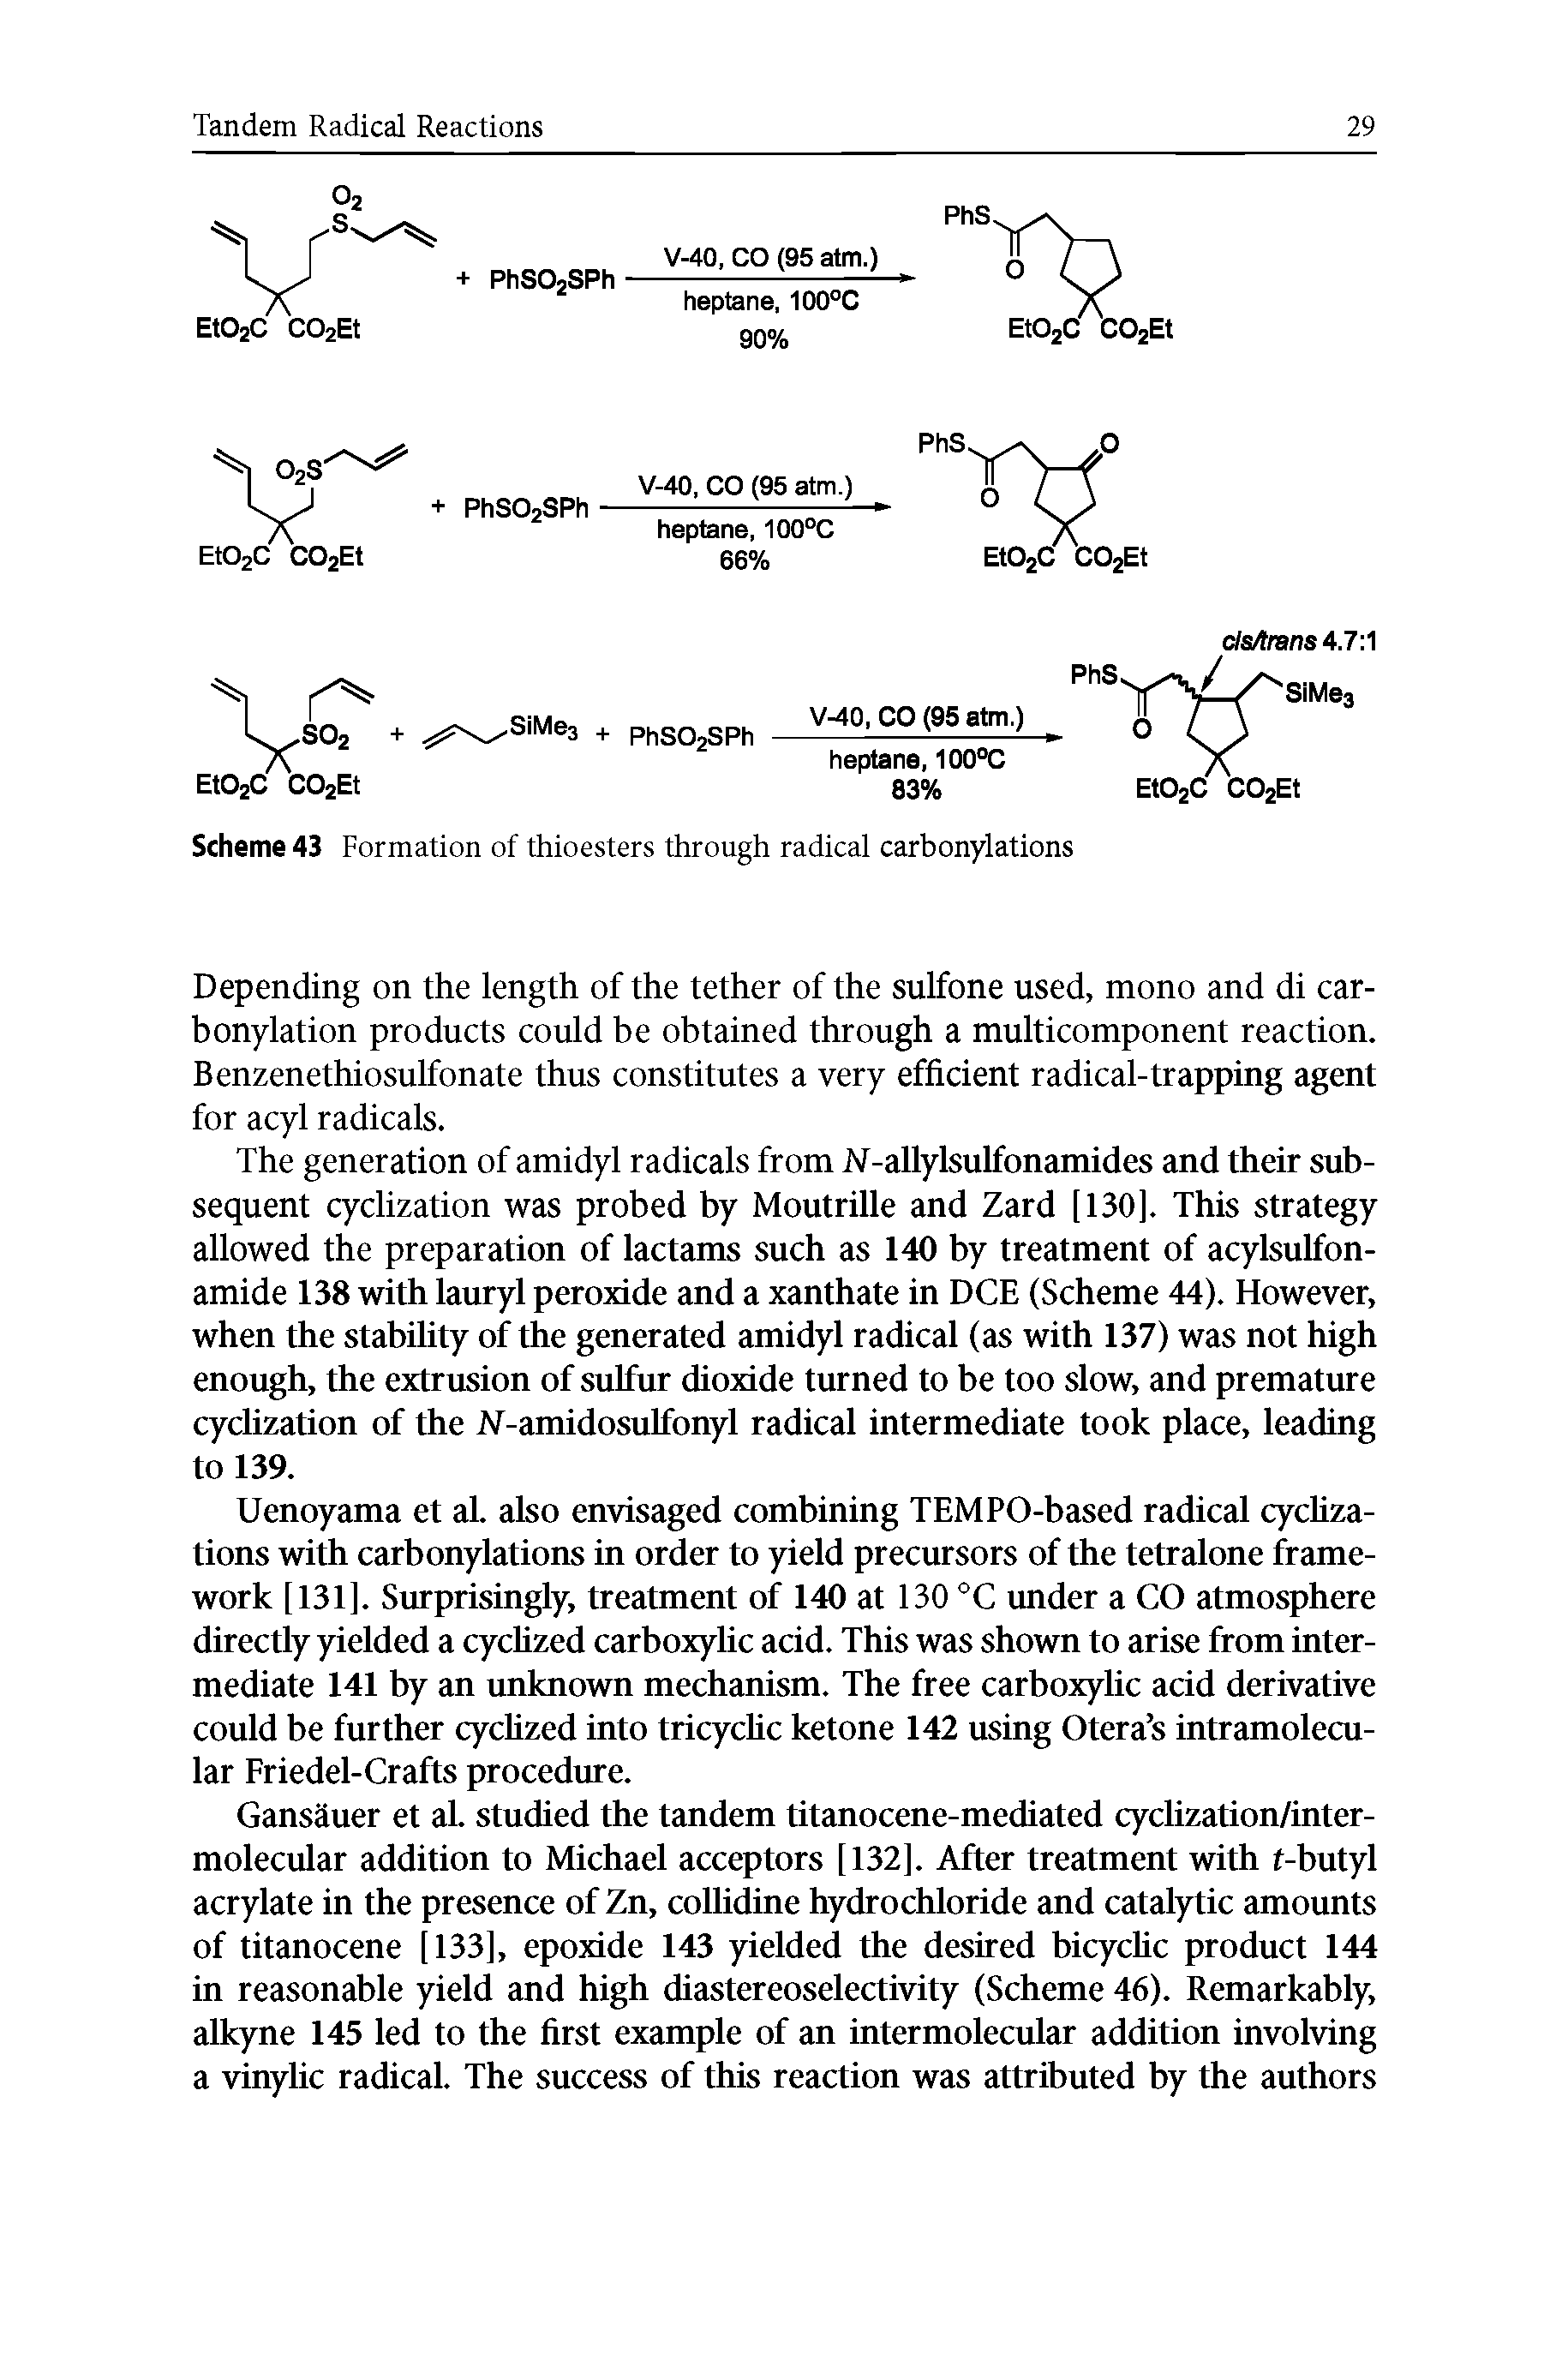 Scheme 43 Formation of thioesters through radical carbonylations...